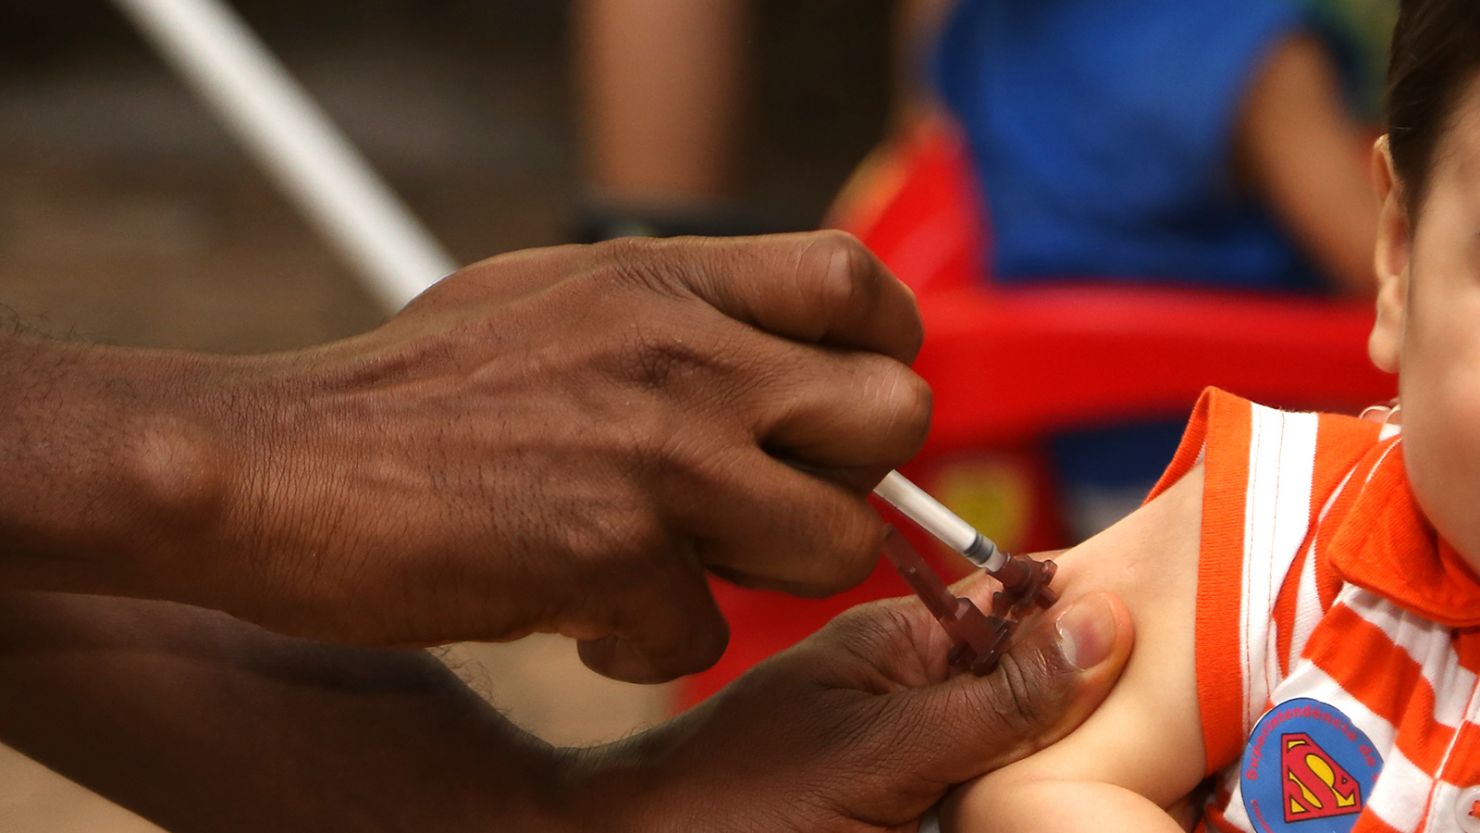 A health care worker administers a polio vaccine to a child in Brasilia, Brazil, on October 17.